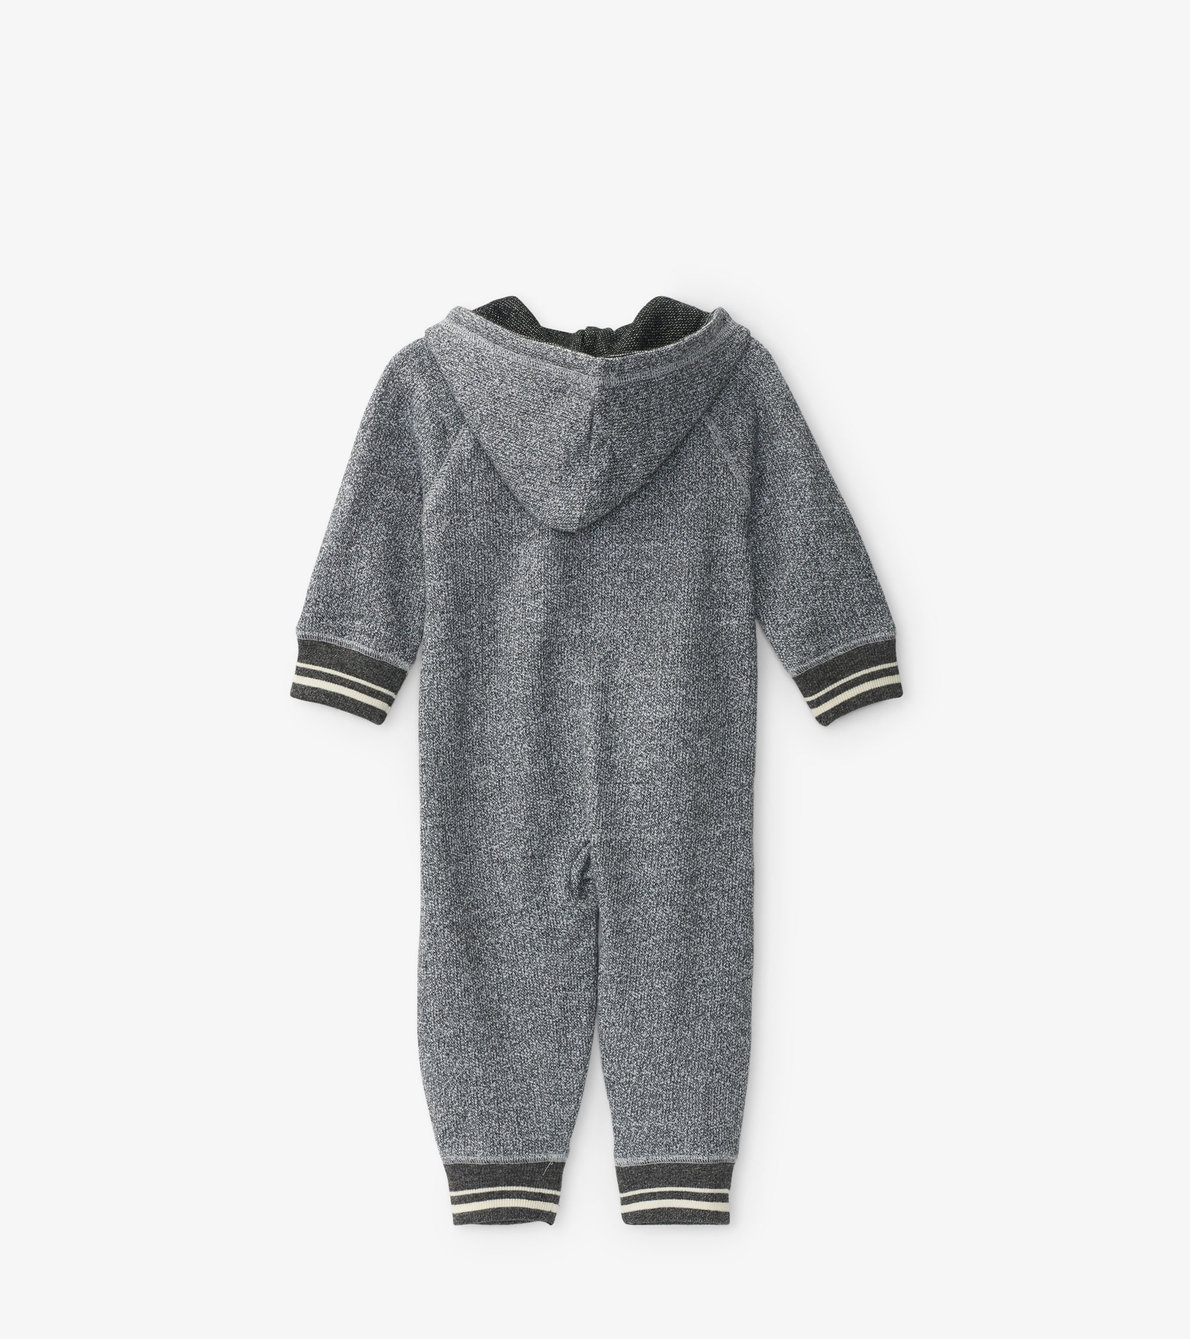 View larger image of Marled Grey Baby Heritage Full Zip Romper